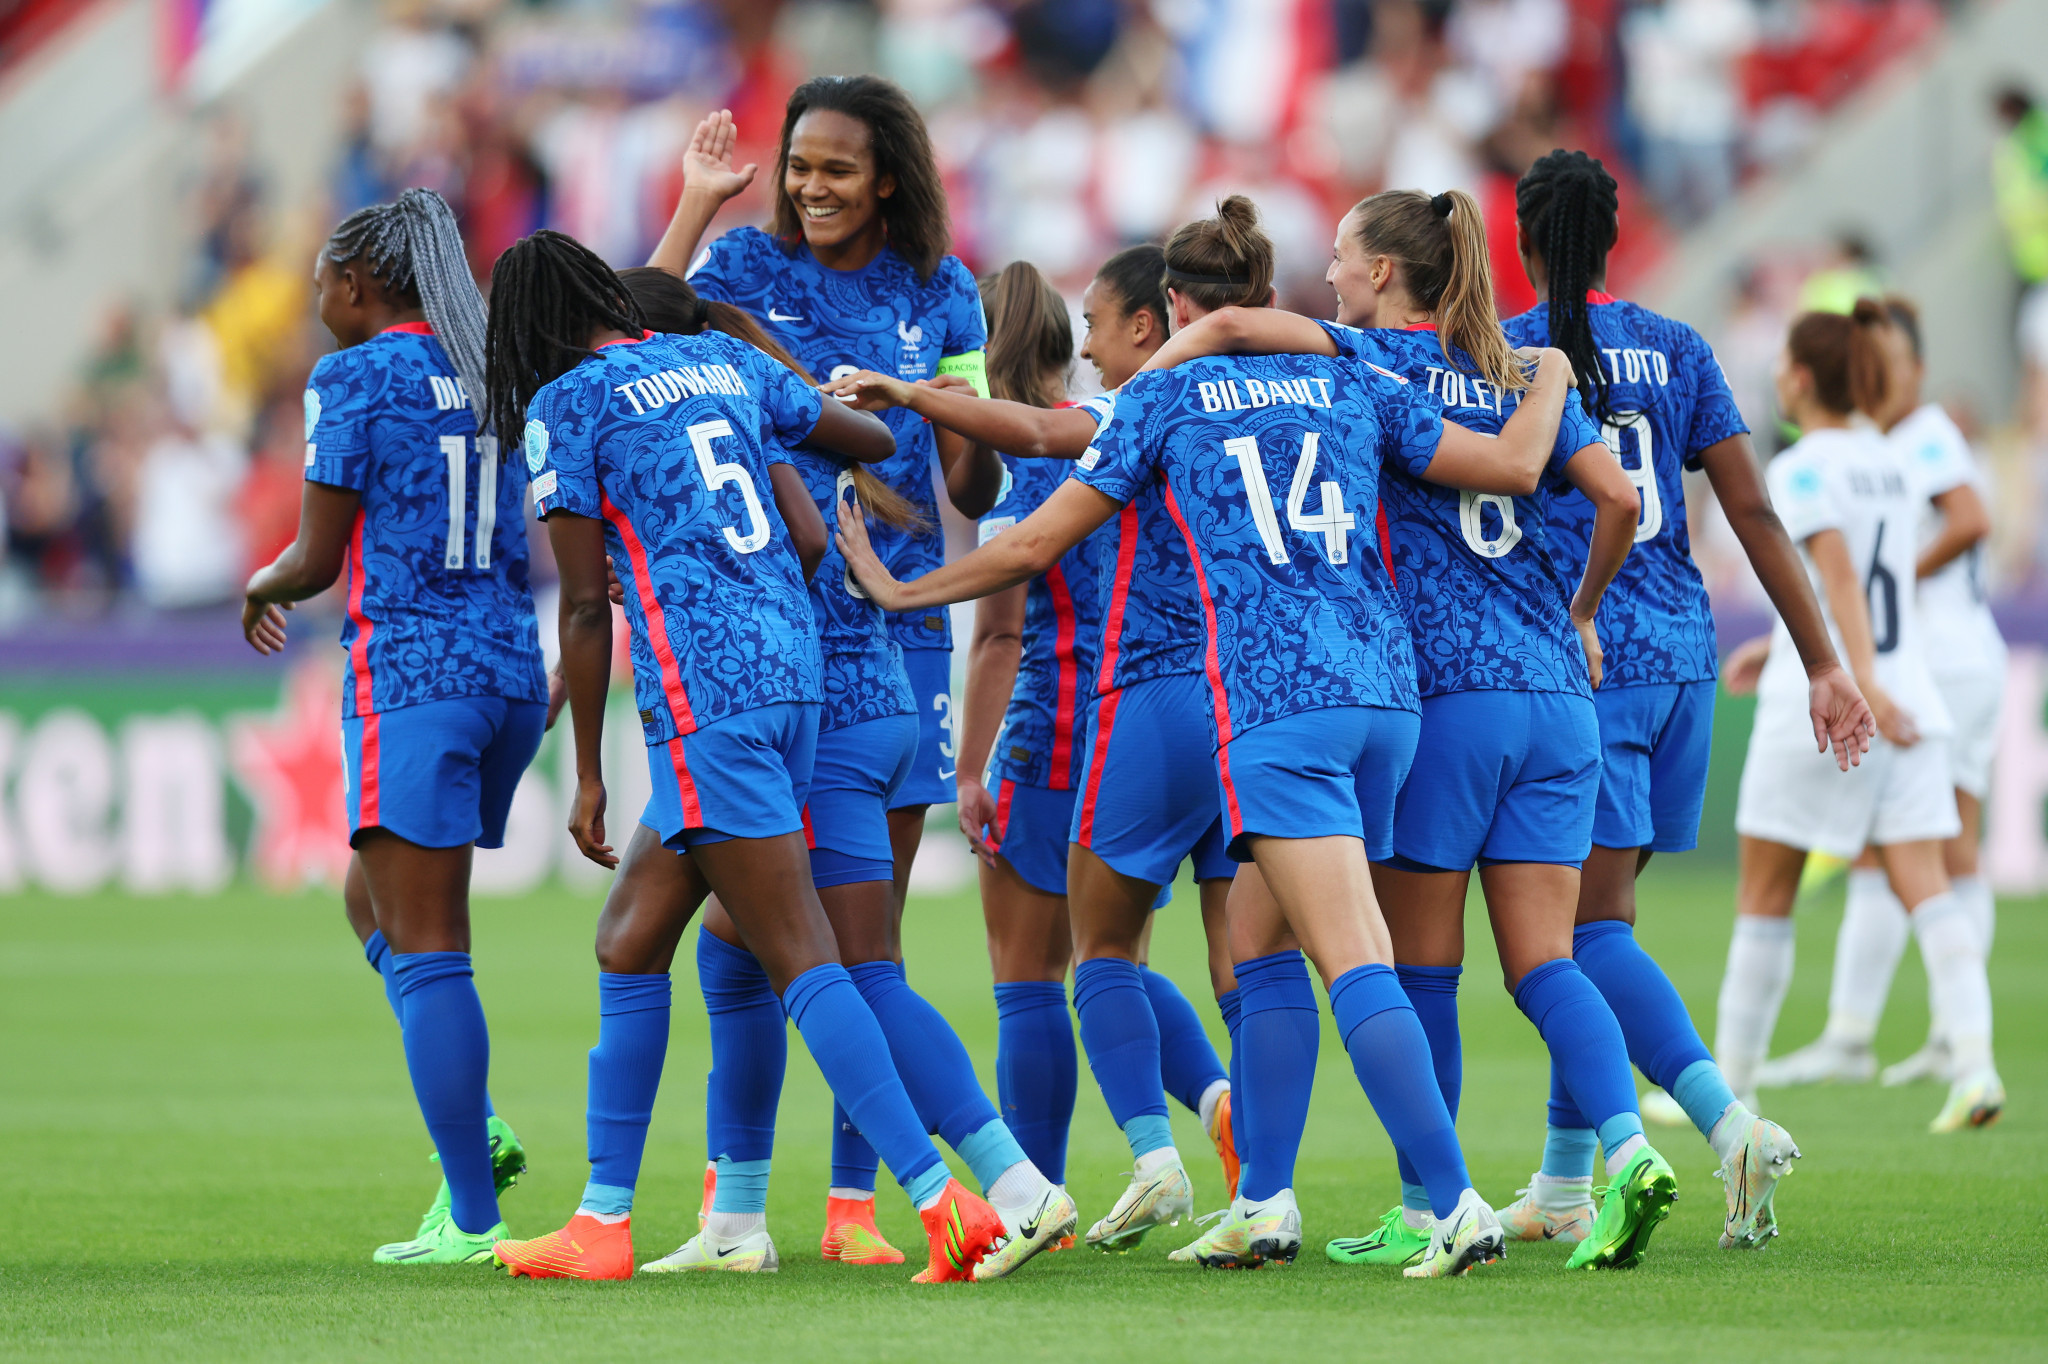 Geyoro first-half hat-trick helps France to big win over Italy at UEFA Women’s Euro 2022